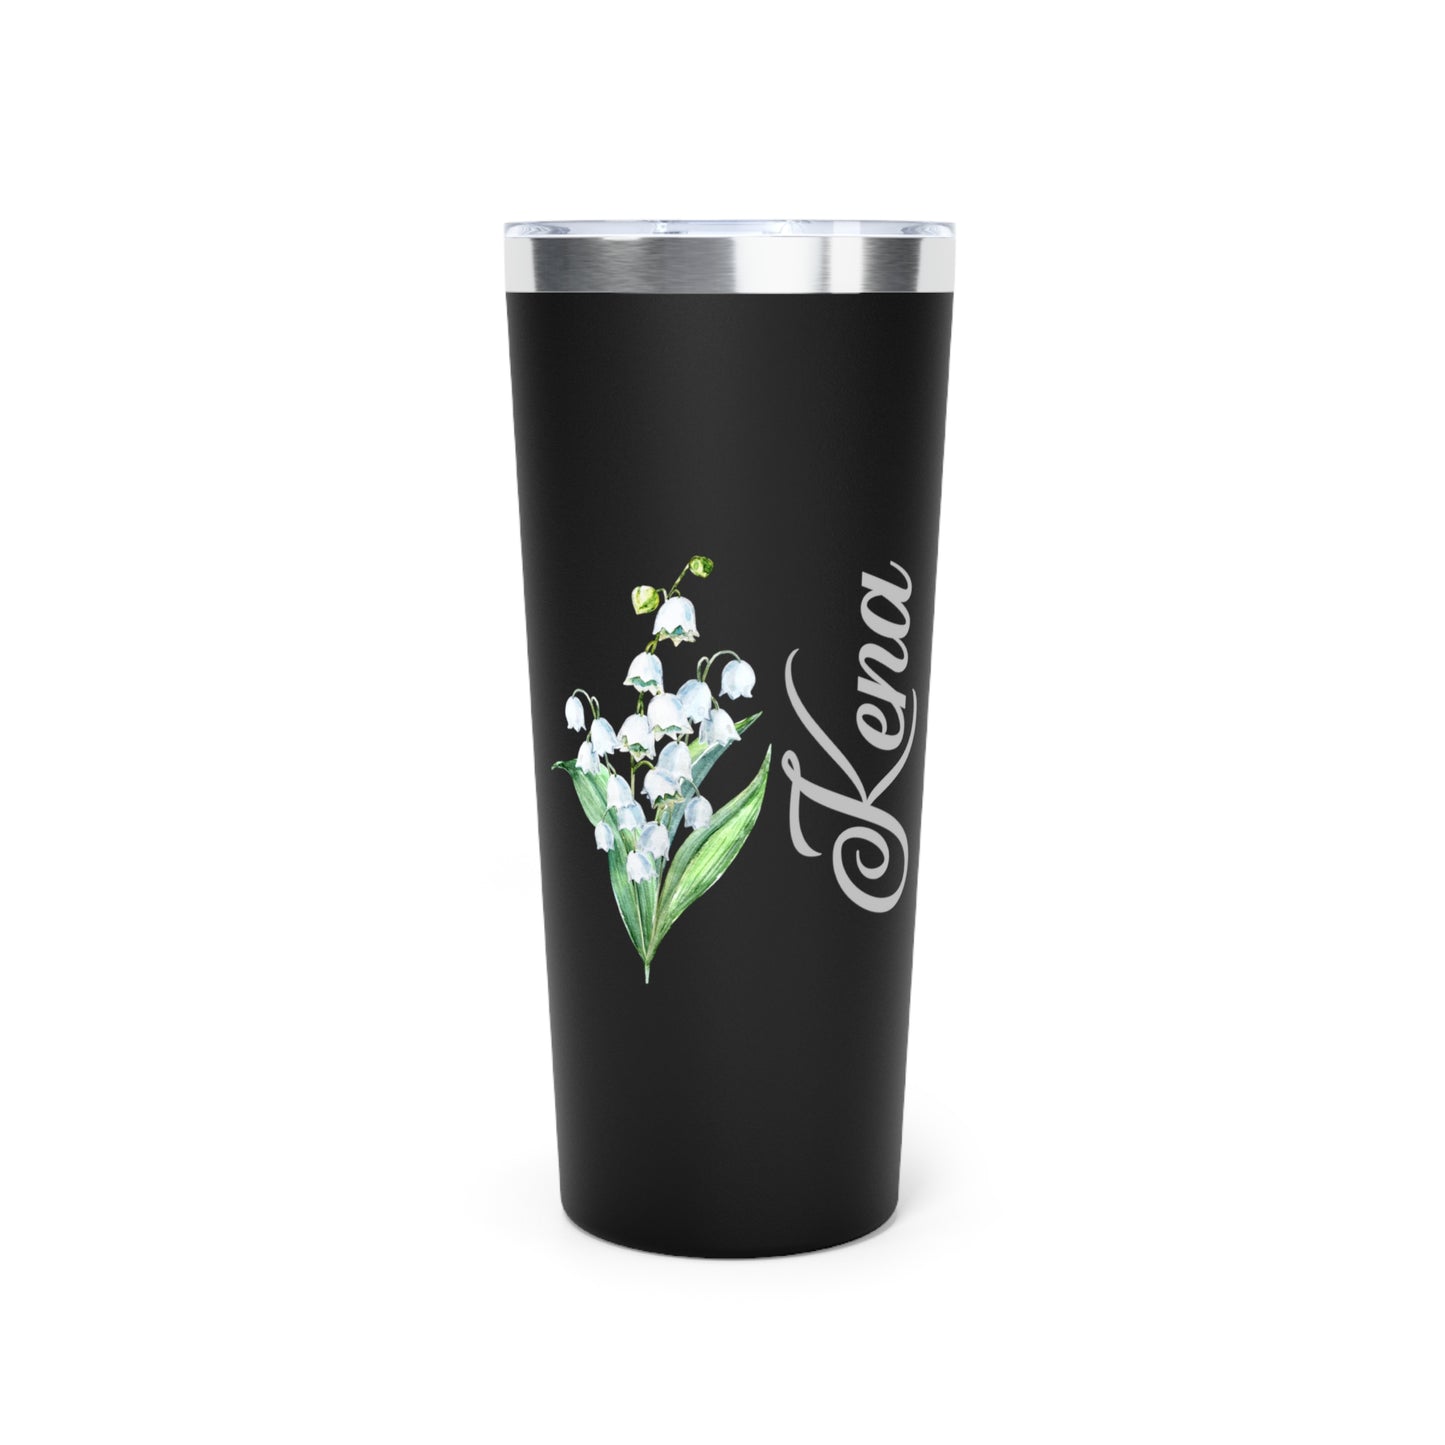 May Personalized Birth Flower Tumbler, Personalized Birth Flower Coffee Cup With Name, Gifts for Her, Bridesmaid Proposal, Party Favor